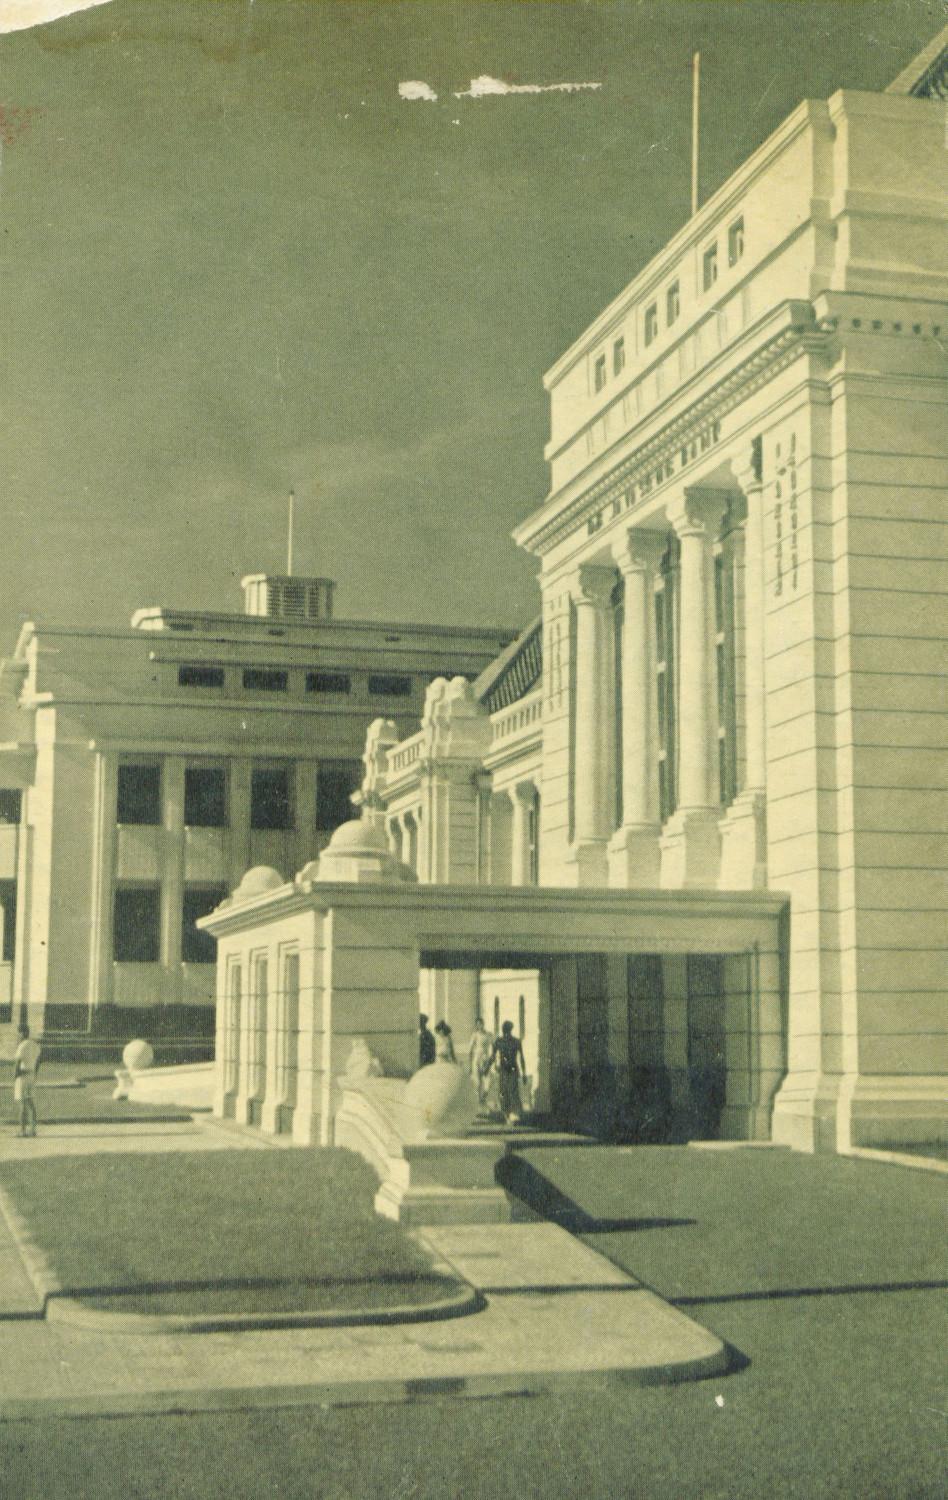 Front Portico of De Javasche Bank in 1937, designed by Fermont-Cuypers in Batavia; the building has Neo-Classic style with ornaments influenced by Hindu-Javanese temple reliefs